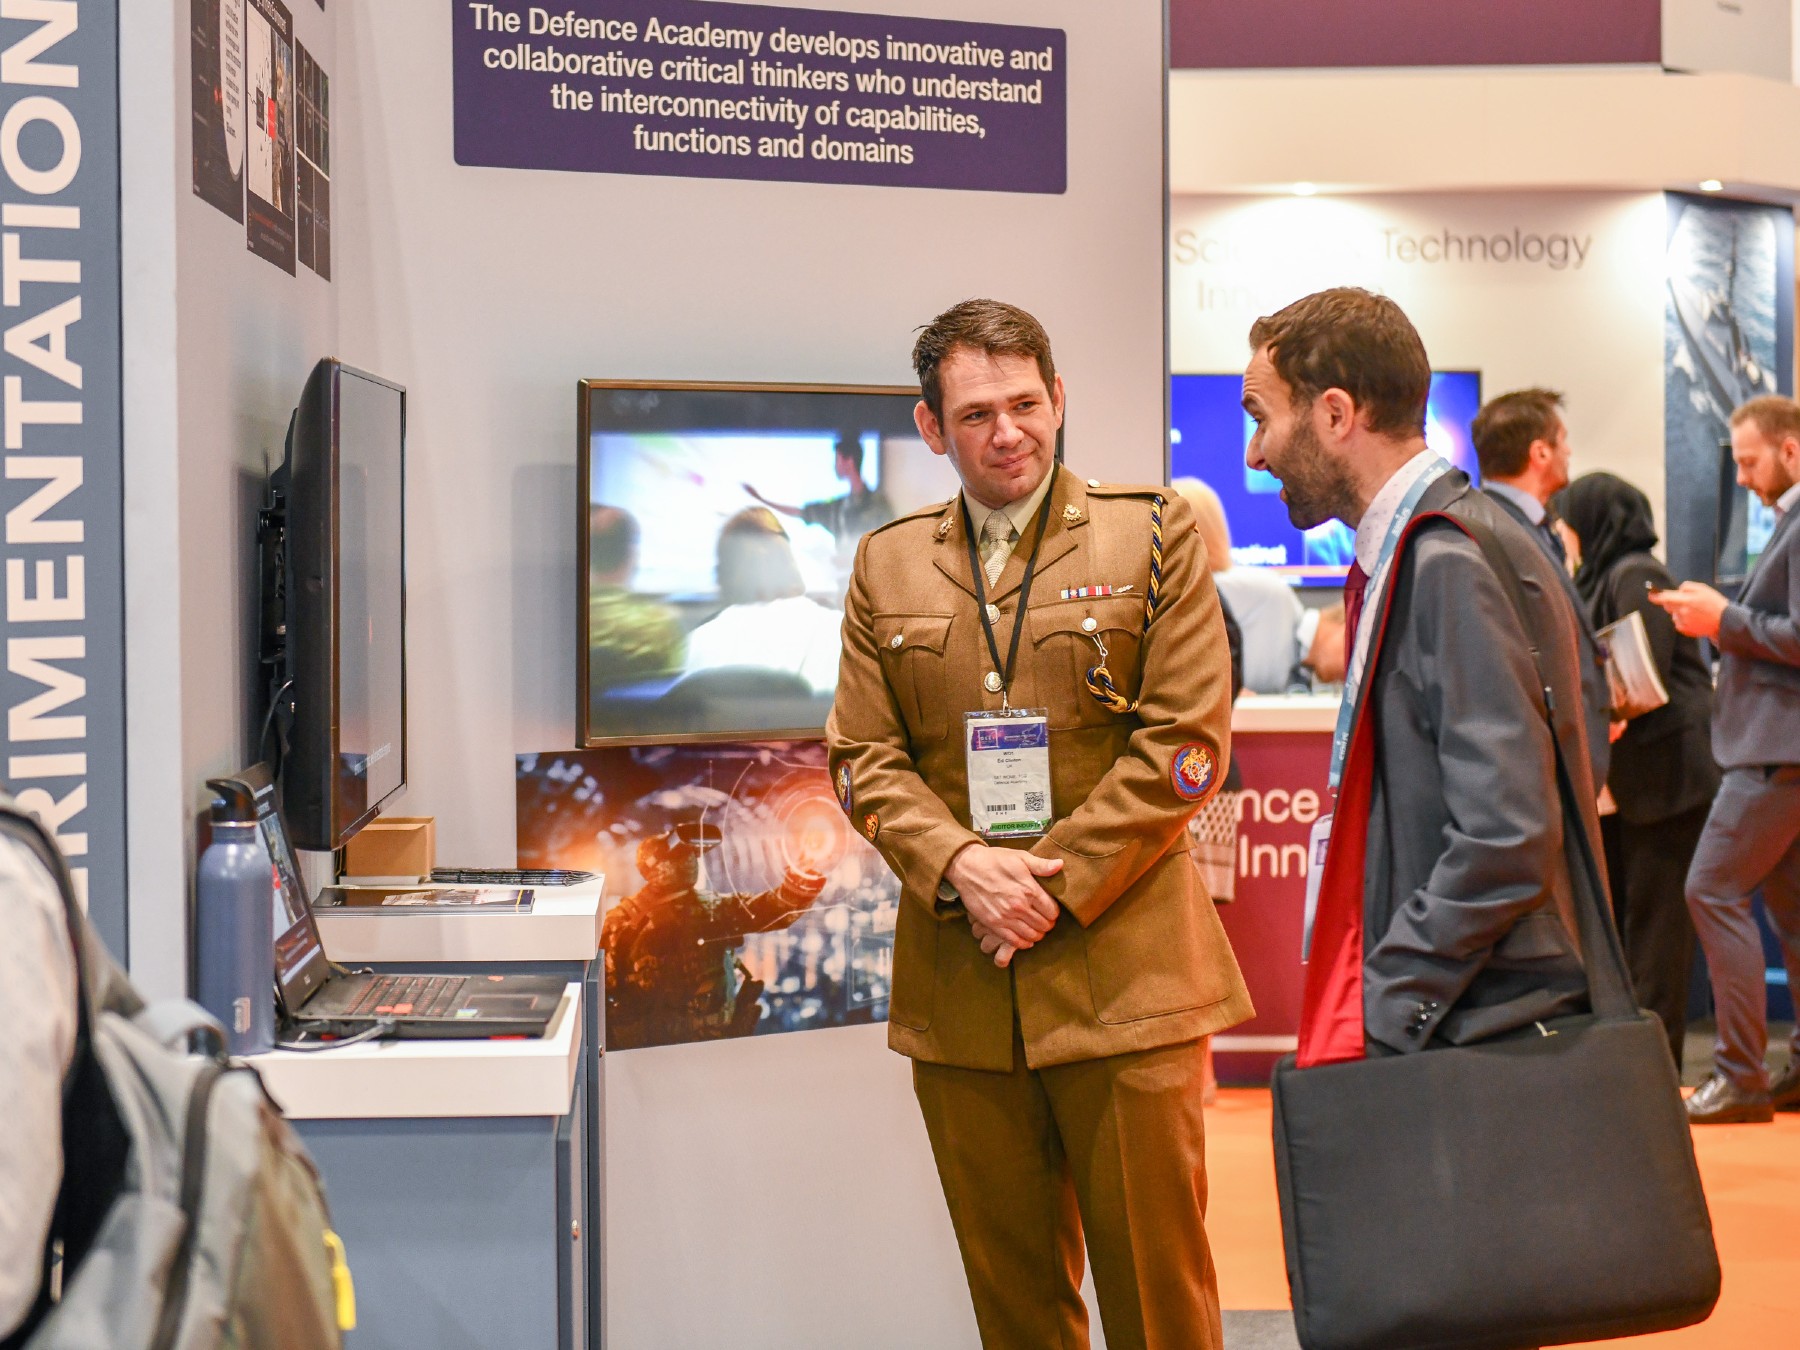 Man in Army uniform talking to another man in business attire at a conference exhibition